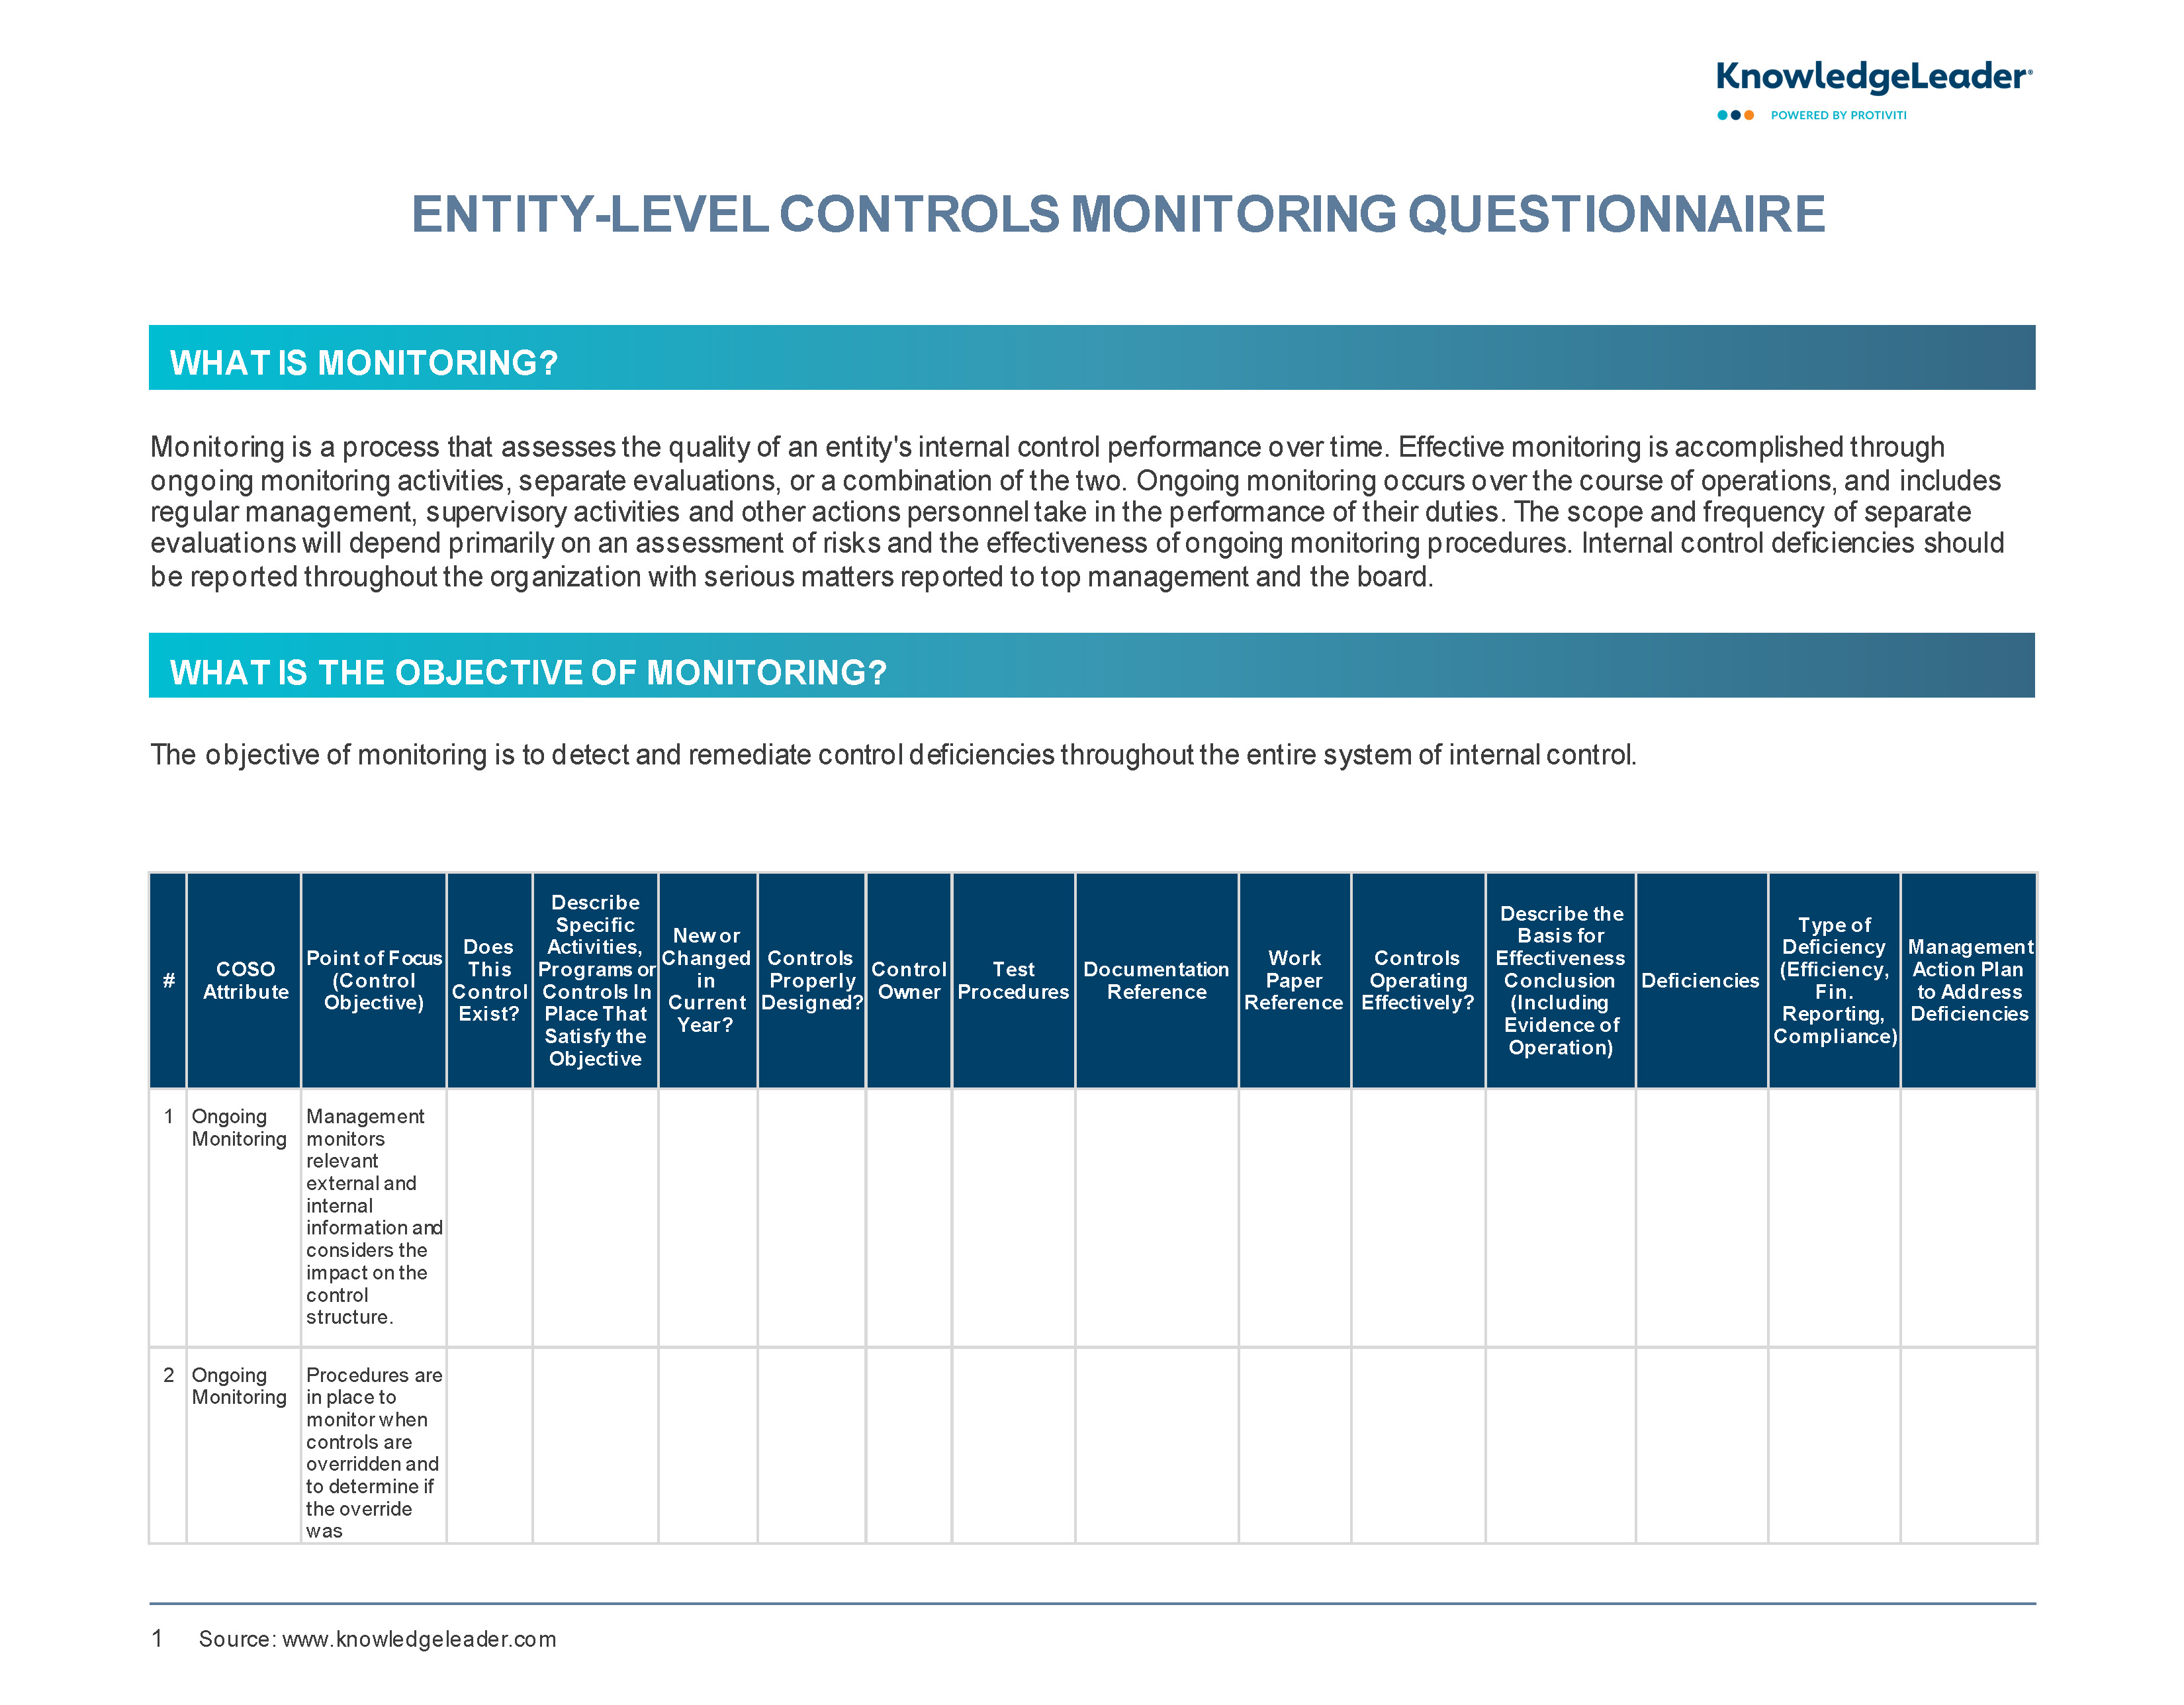 Screenshot of the first page of Entity-Level Controls Monitoring Questionnaire